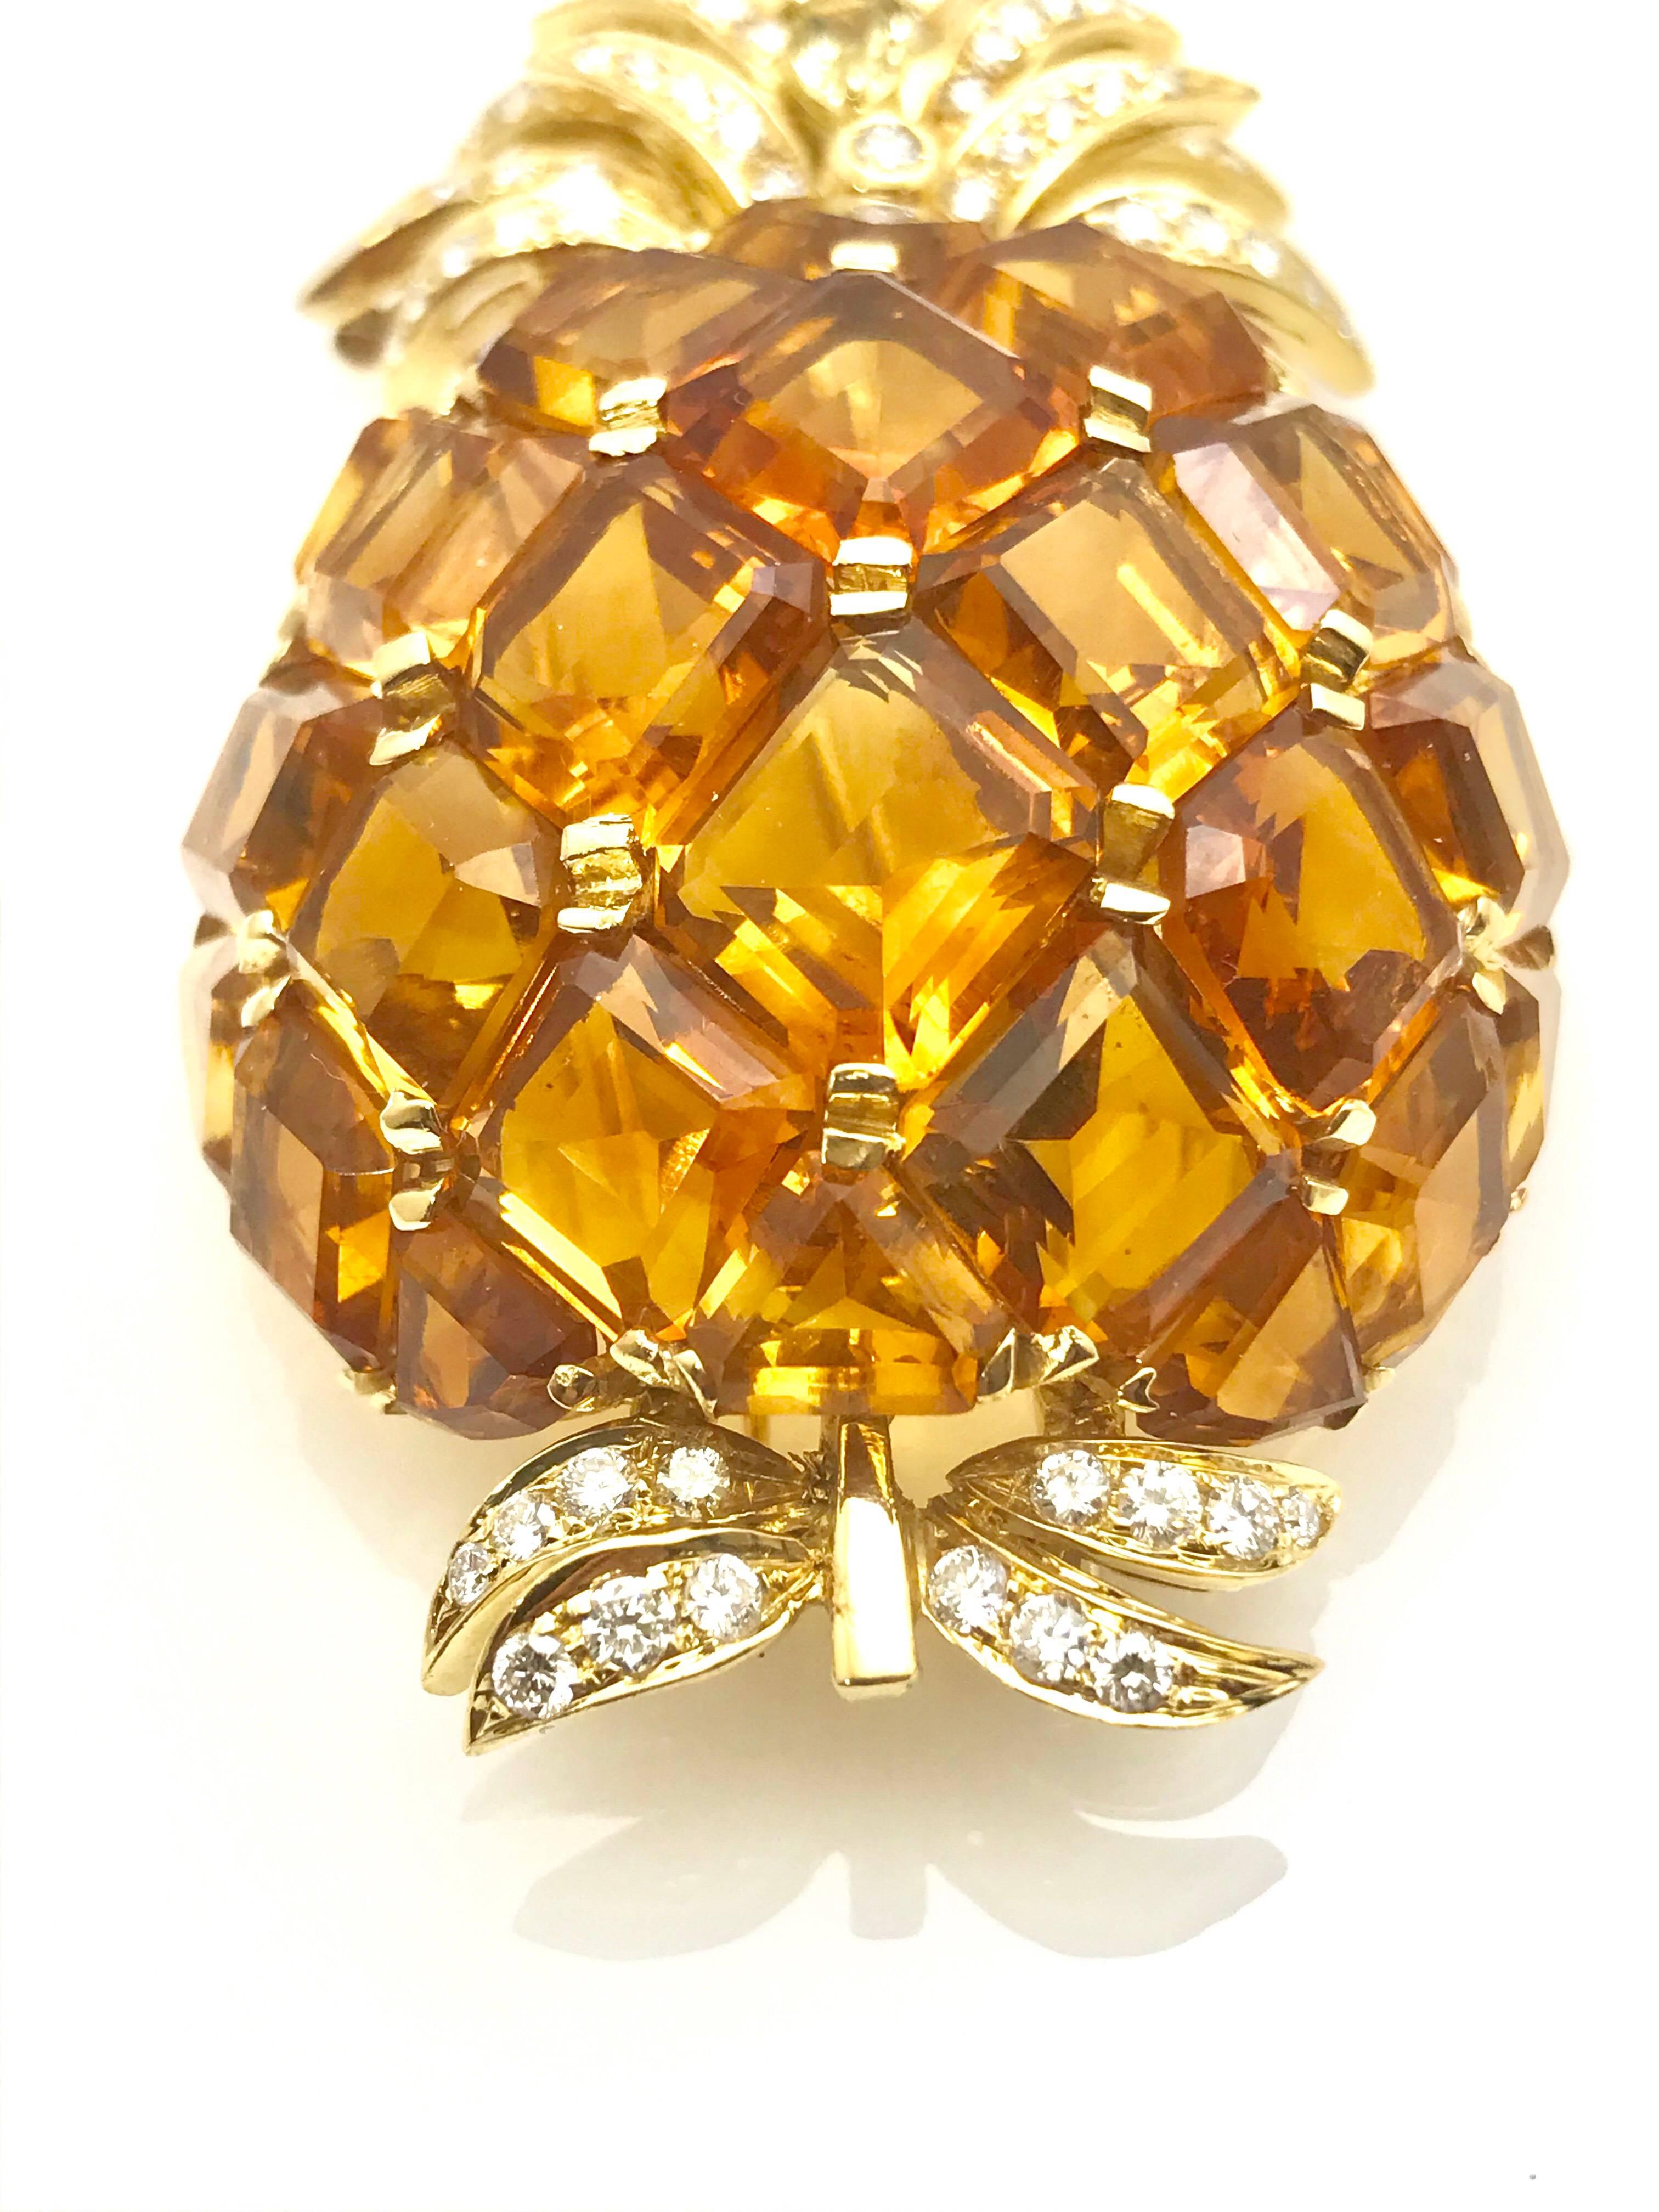 A 51.00 carat total weight citrine and diamond 18 karat yellow gold pineapple pendant brooch.  The square cut citrines are shared prong set, forming a dome oval shape together.  There is a total of 68 round brilliant diamonds forming the stem and